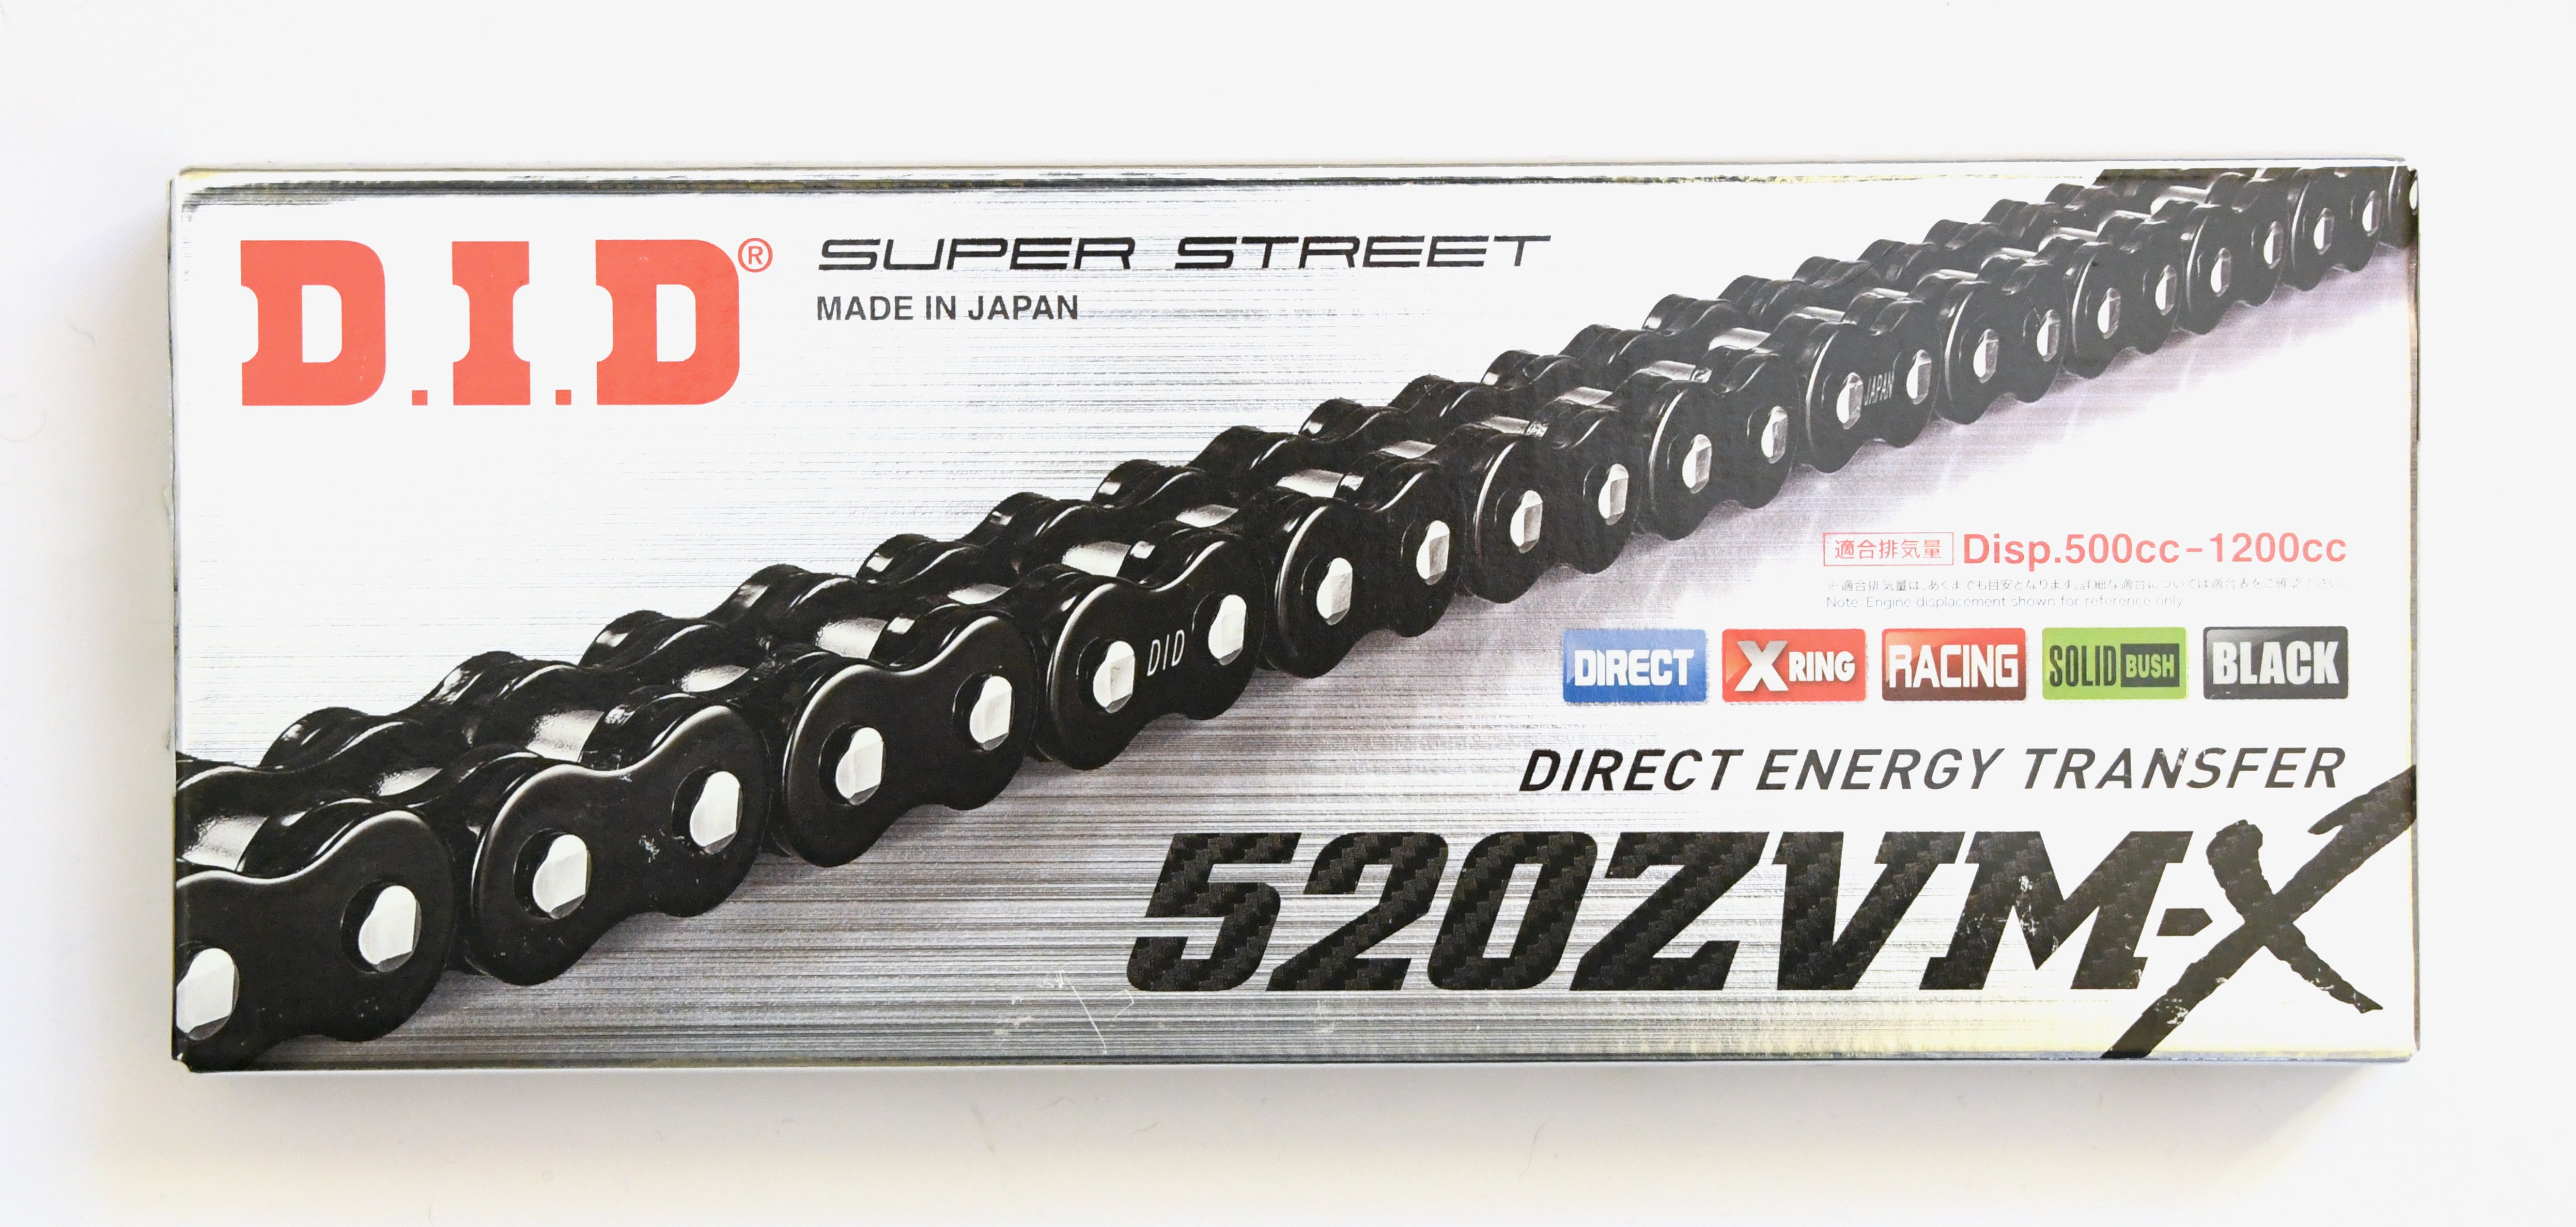 520 Pitch 114 Link Chain - Choose Your Chain (800cc+ Models)